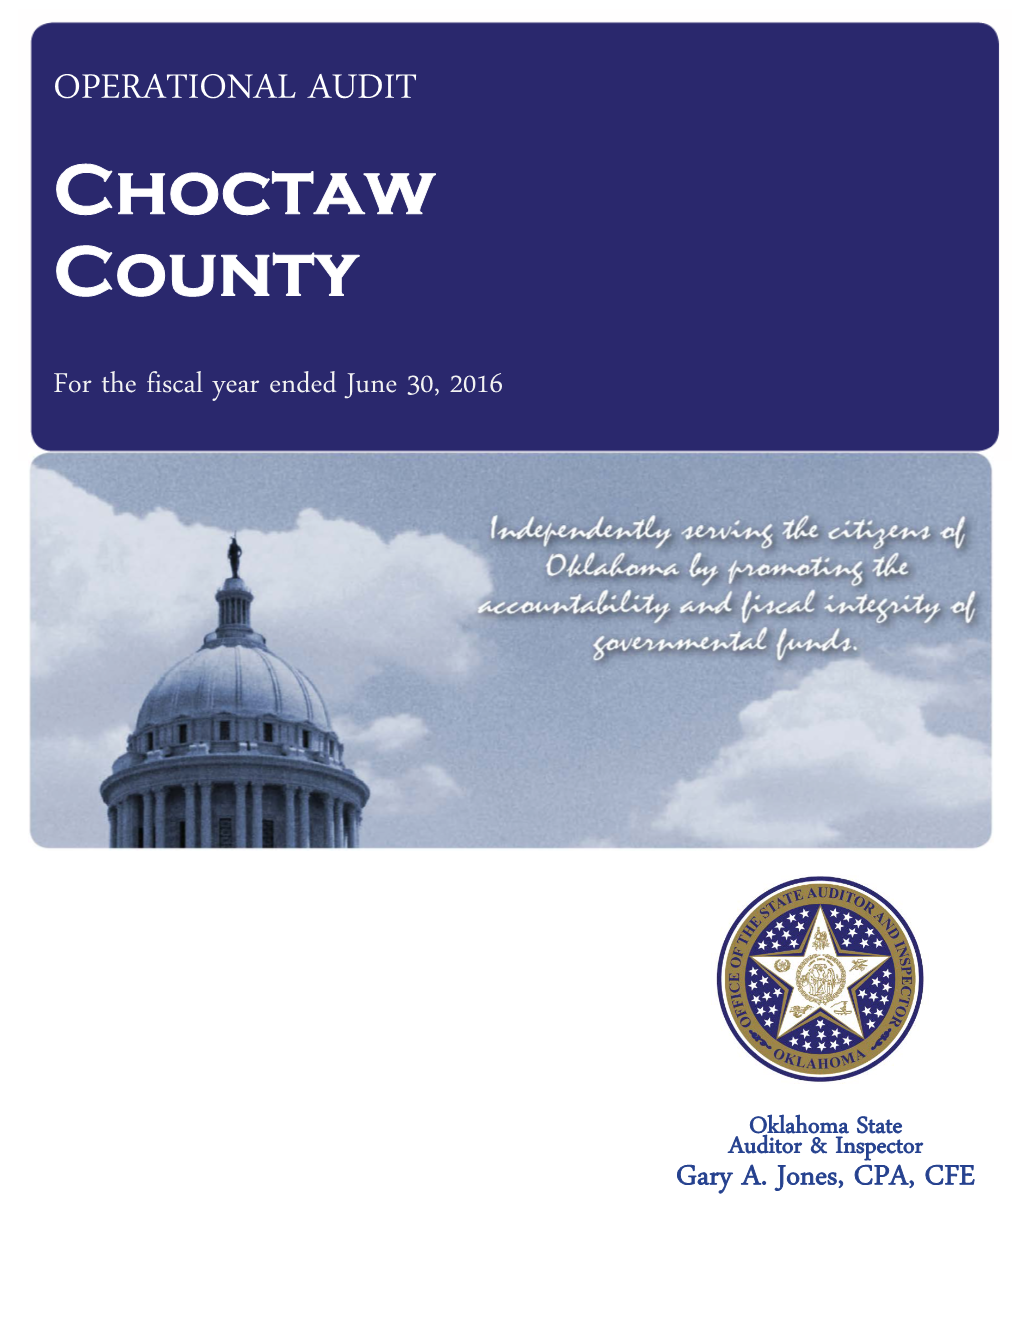 Choctaw County Operational Audit for the Fiscal Year Ended June 30, 2016